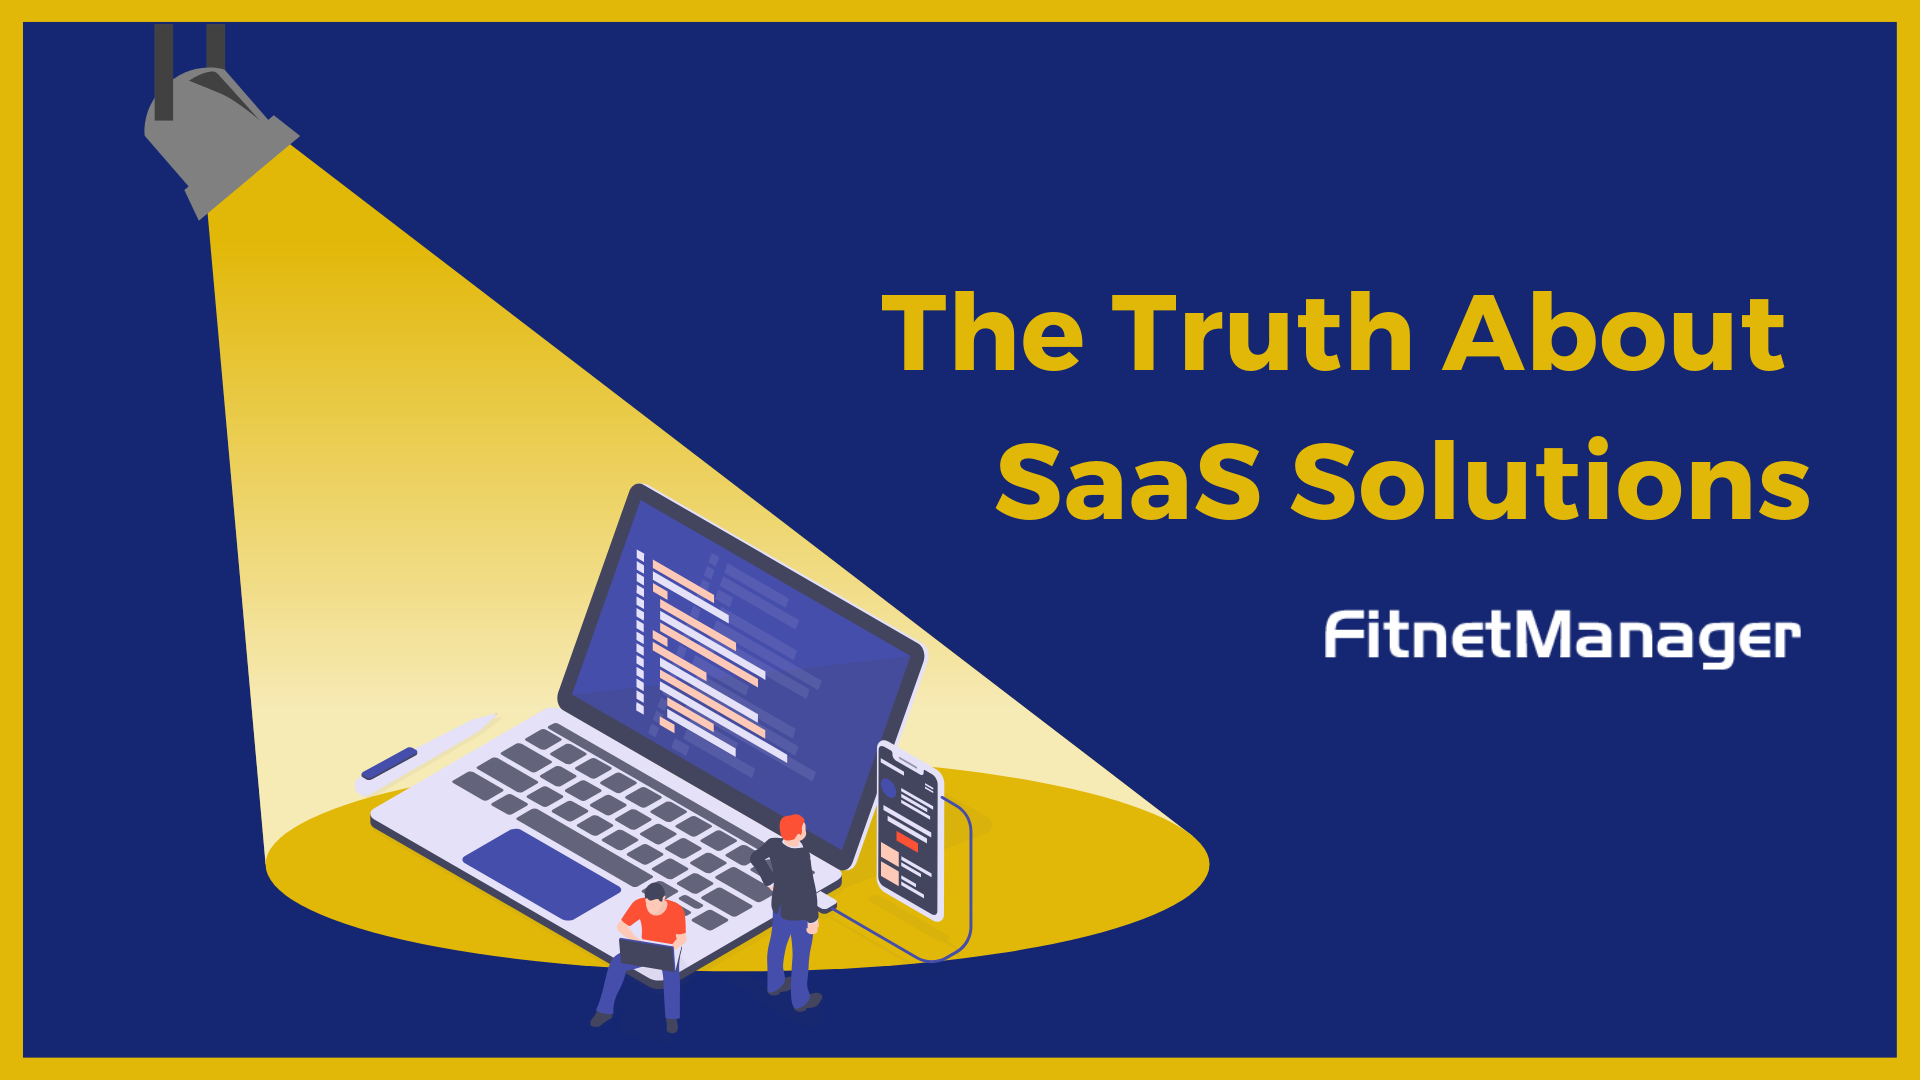 The Truth About SaaS Solutions